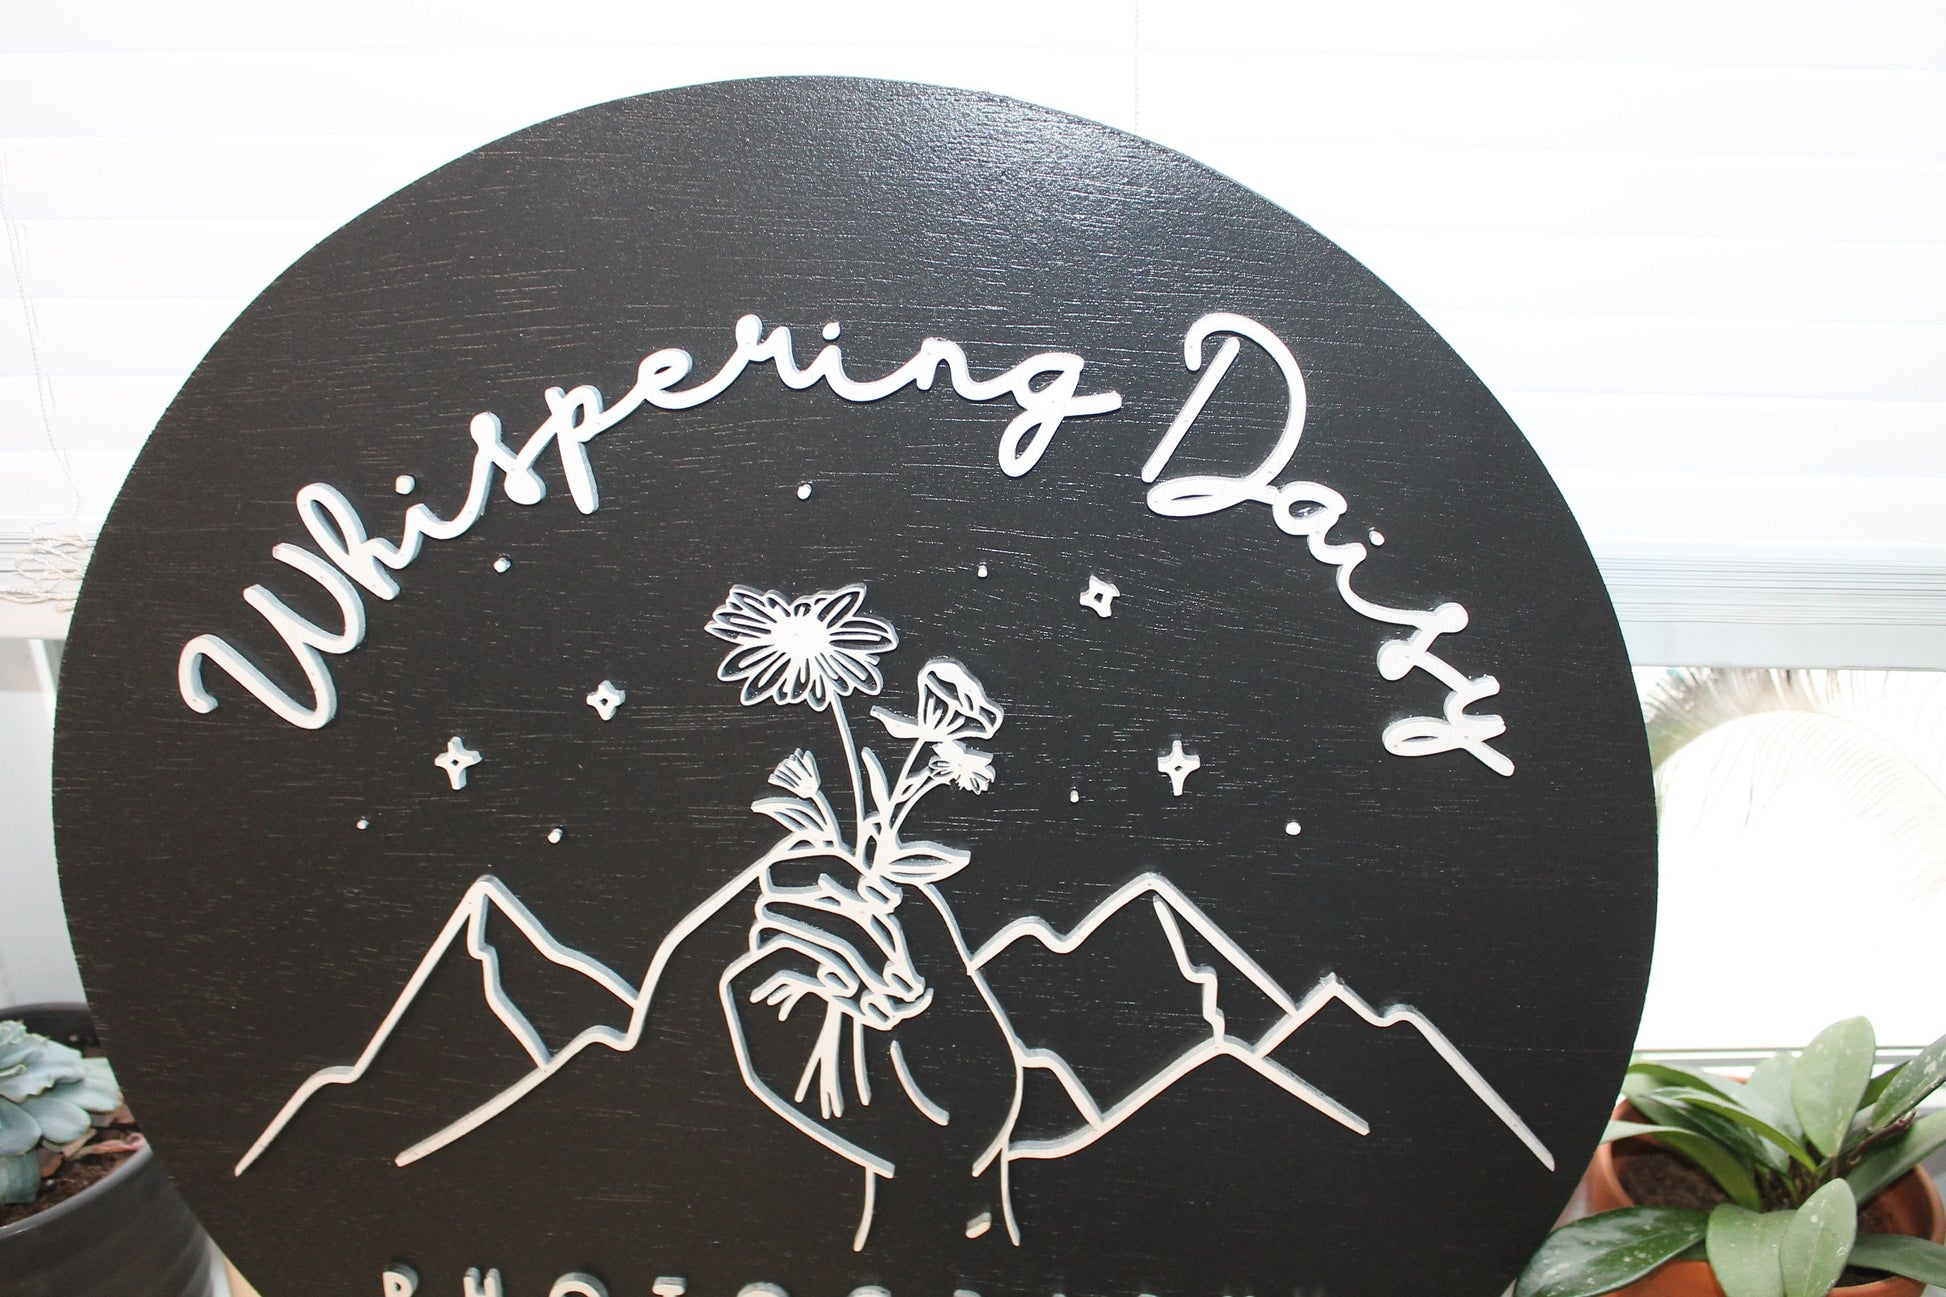 Photographer Sign, Daisy, Floral, Mountain, Photography, Custom, Business Sign, Small Business, 3D, Raised Text, Round, Outline, Line Art